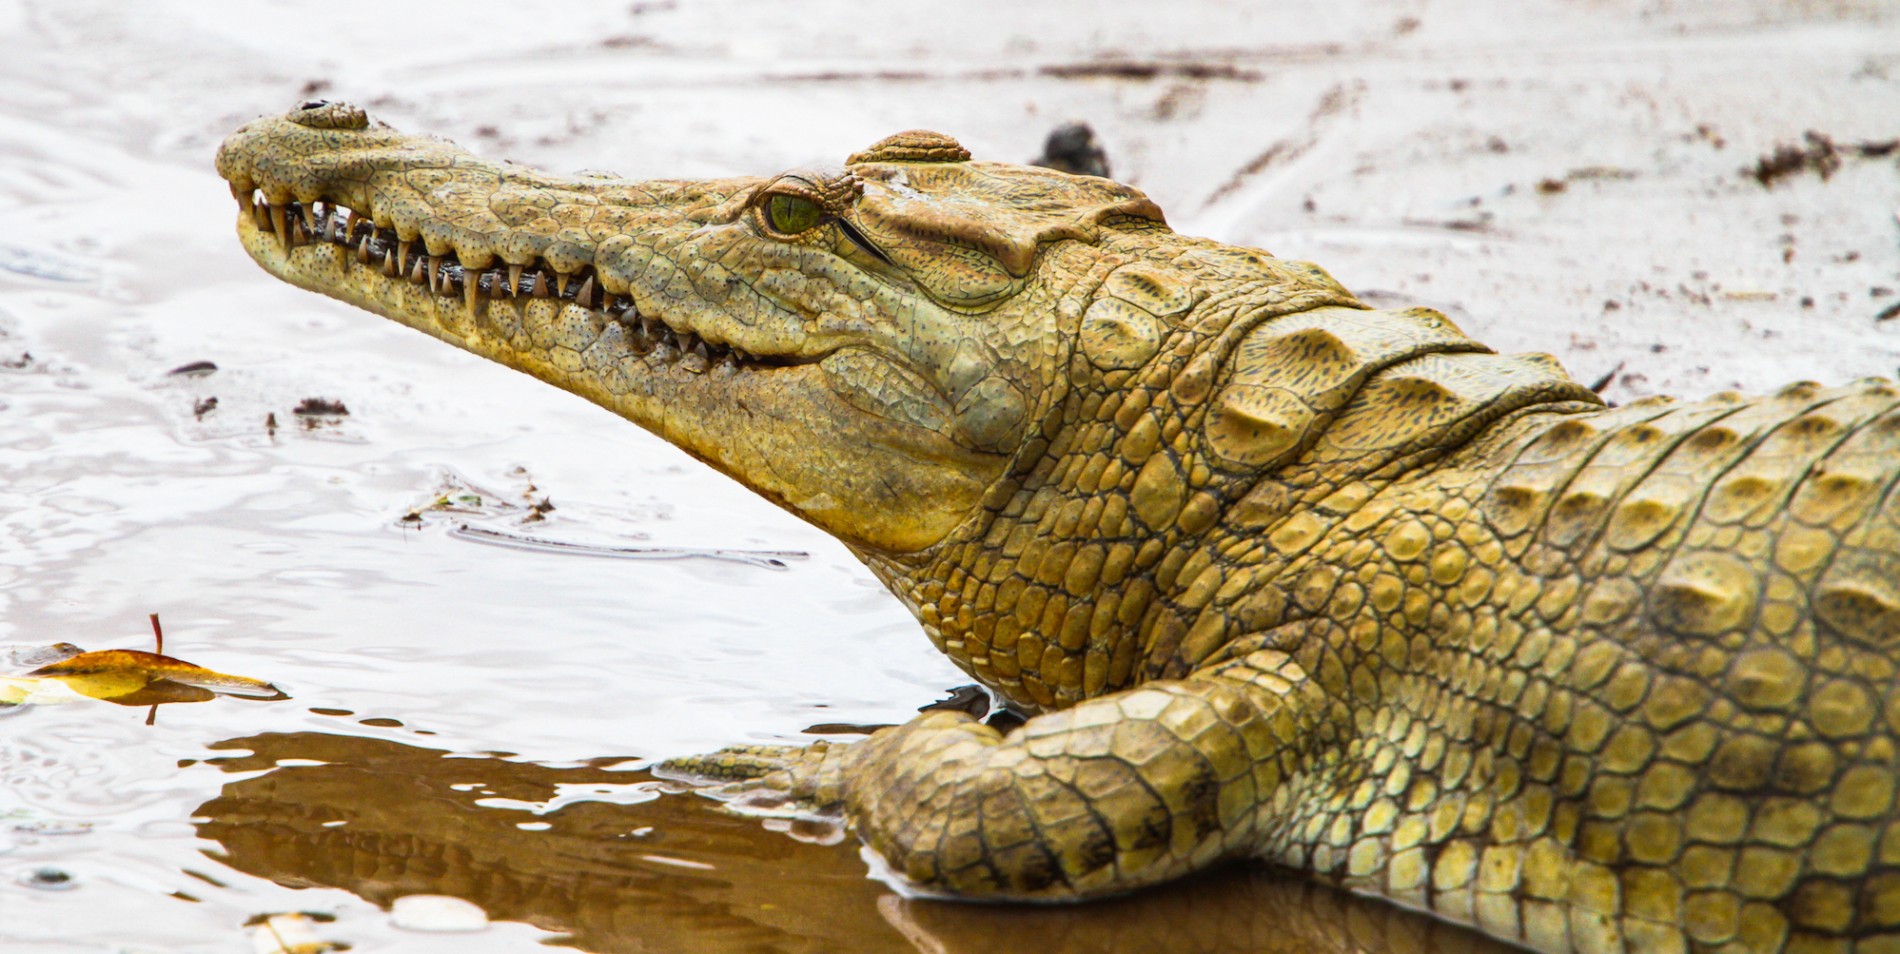 Up close side view of an alligator in Namibia